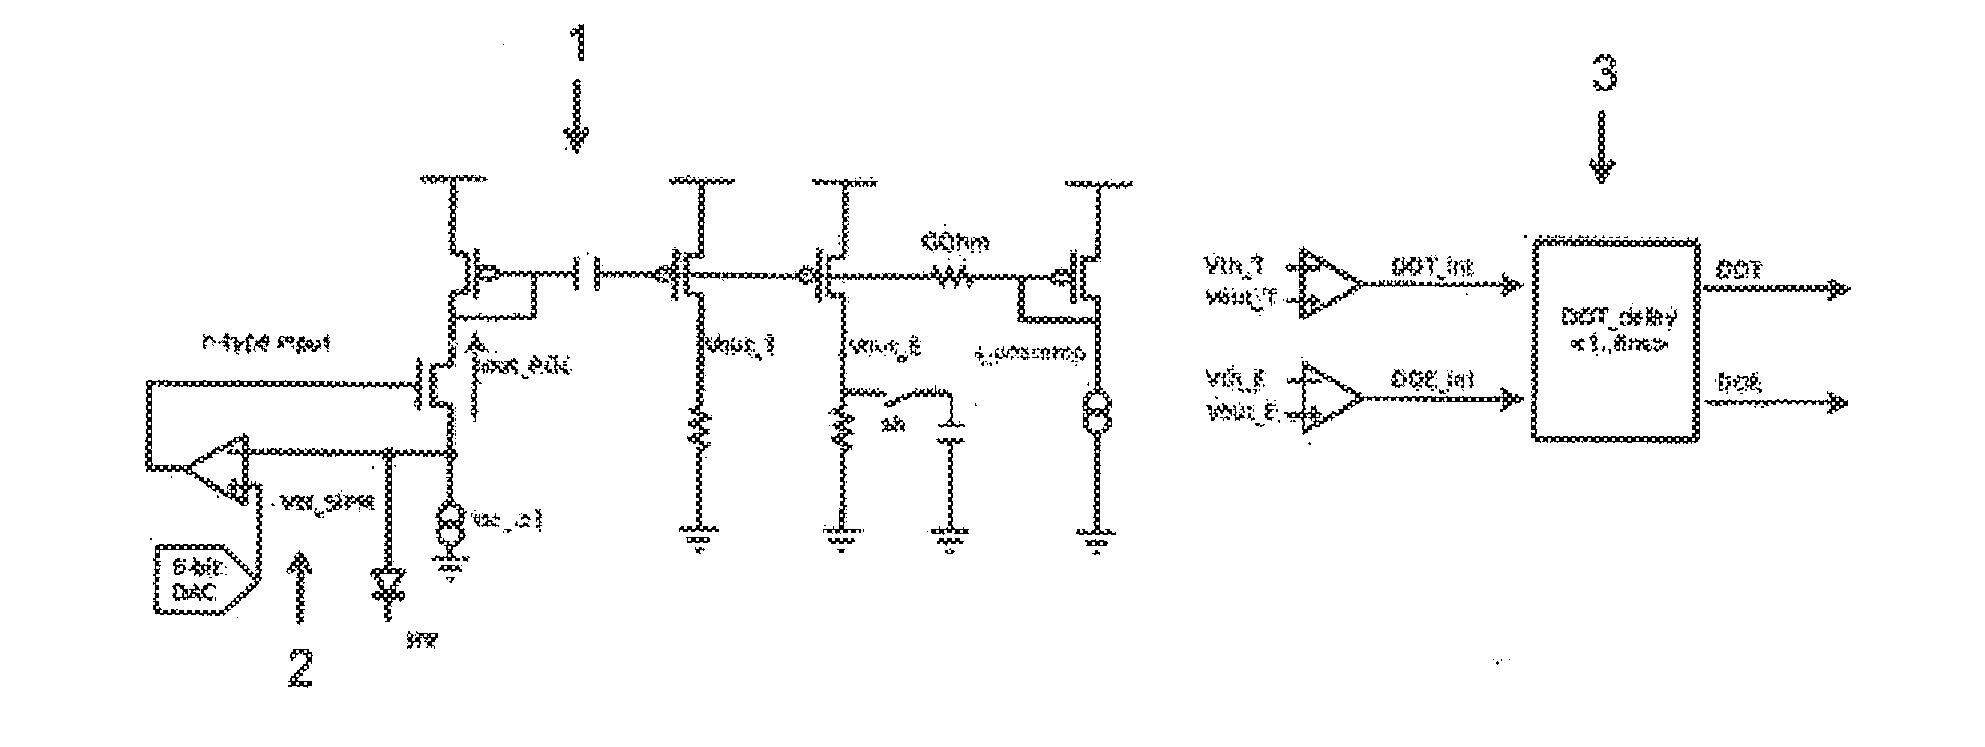 Reading device and method for measuring energy and flight time using silicon photomultipliers